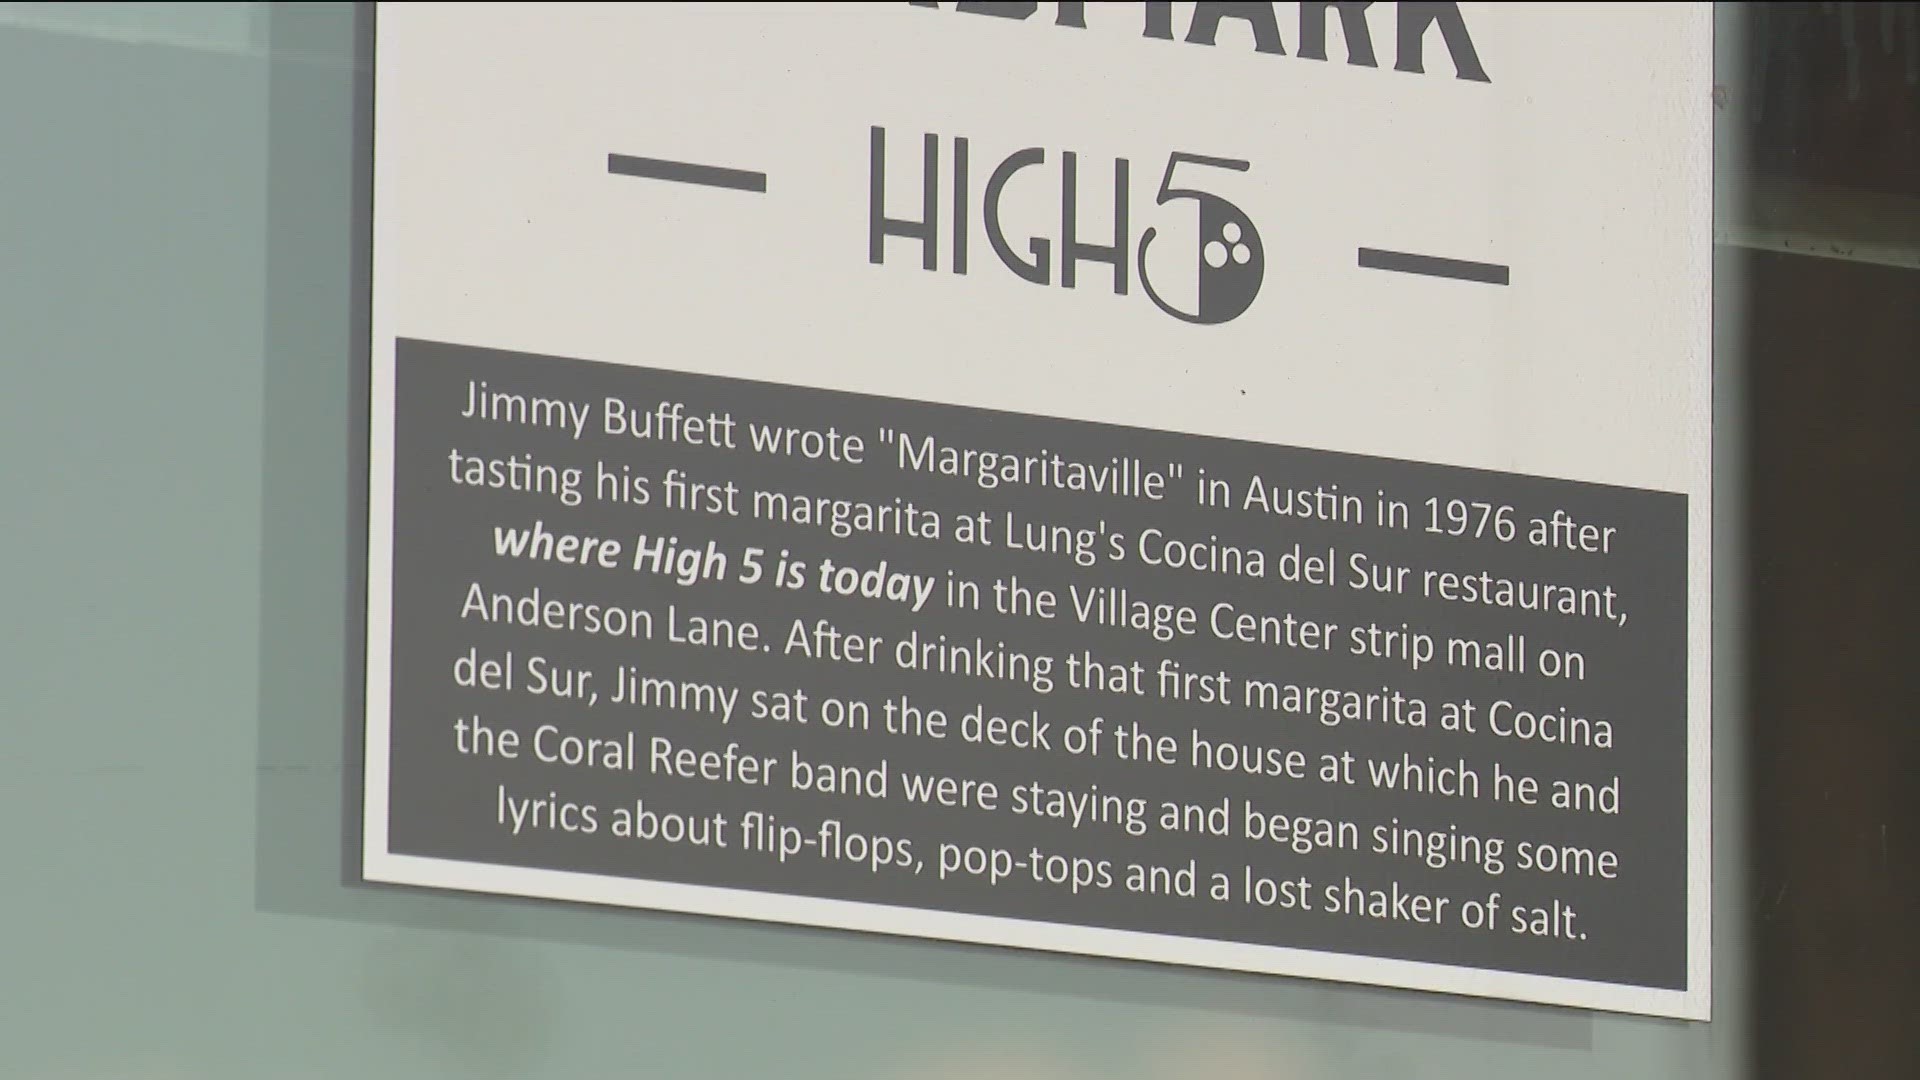 Buffett was inspired to write the song after eating at a Mexican restaurant on Anderson Lane.